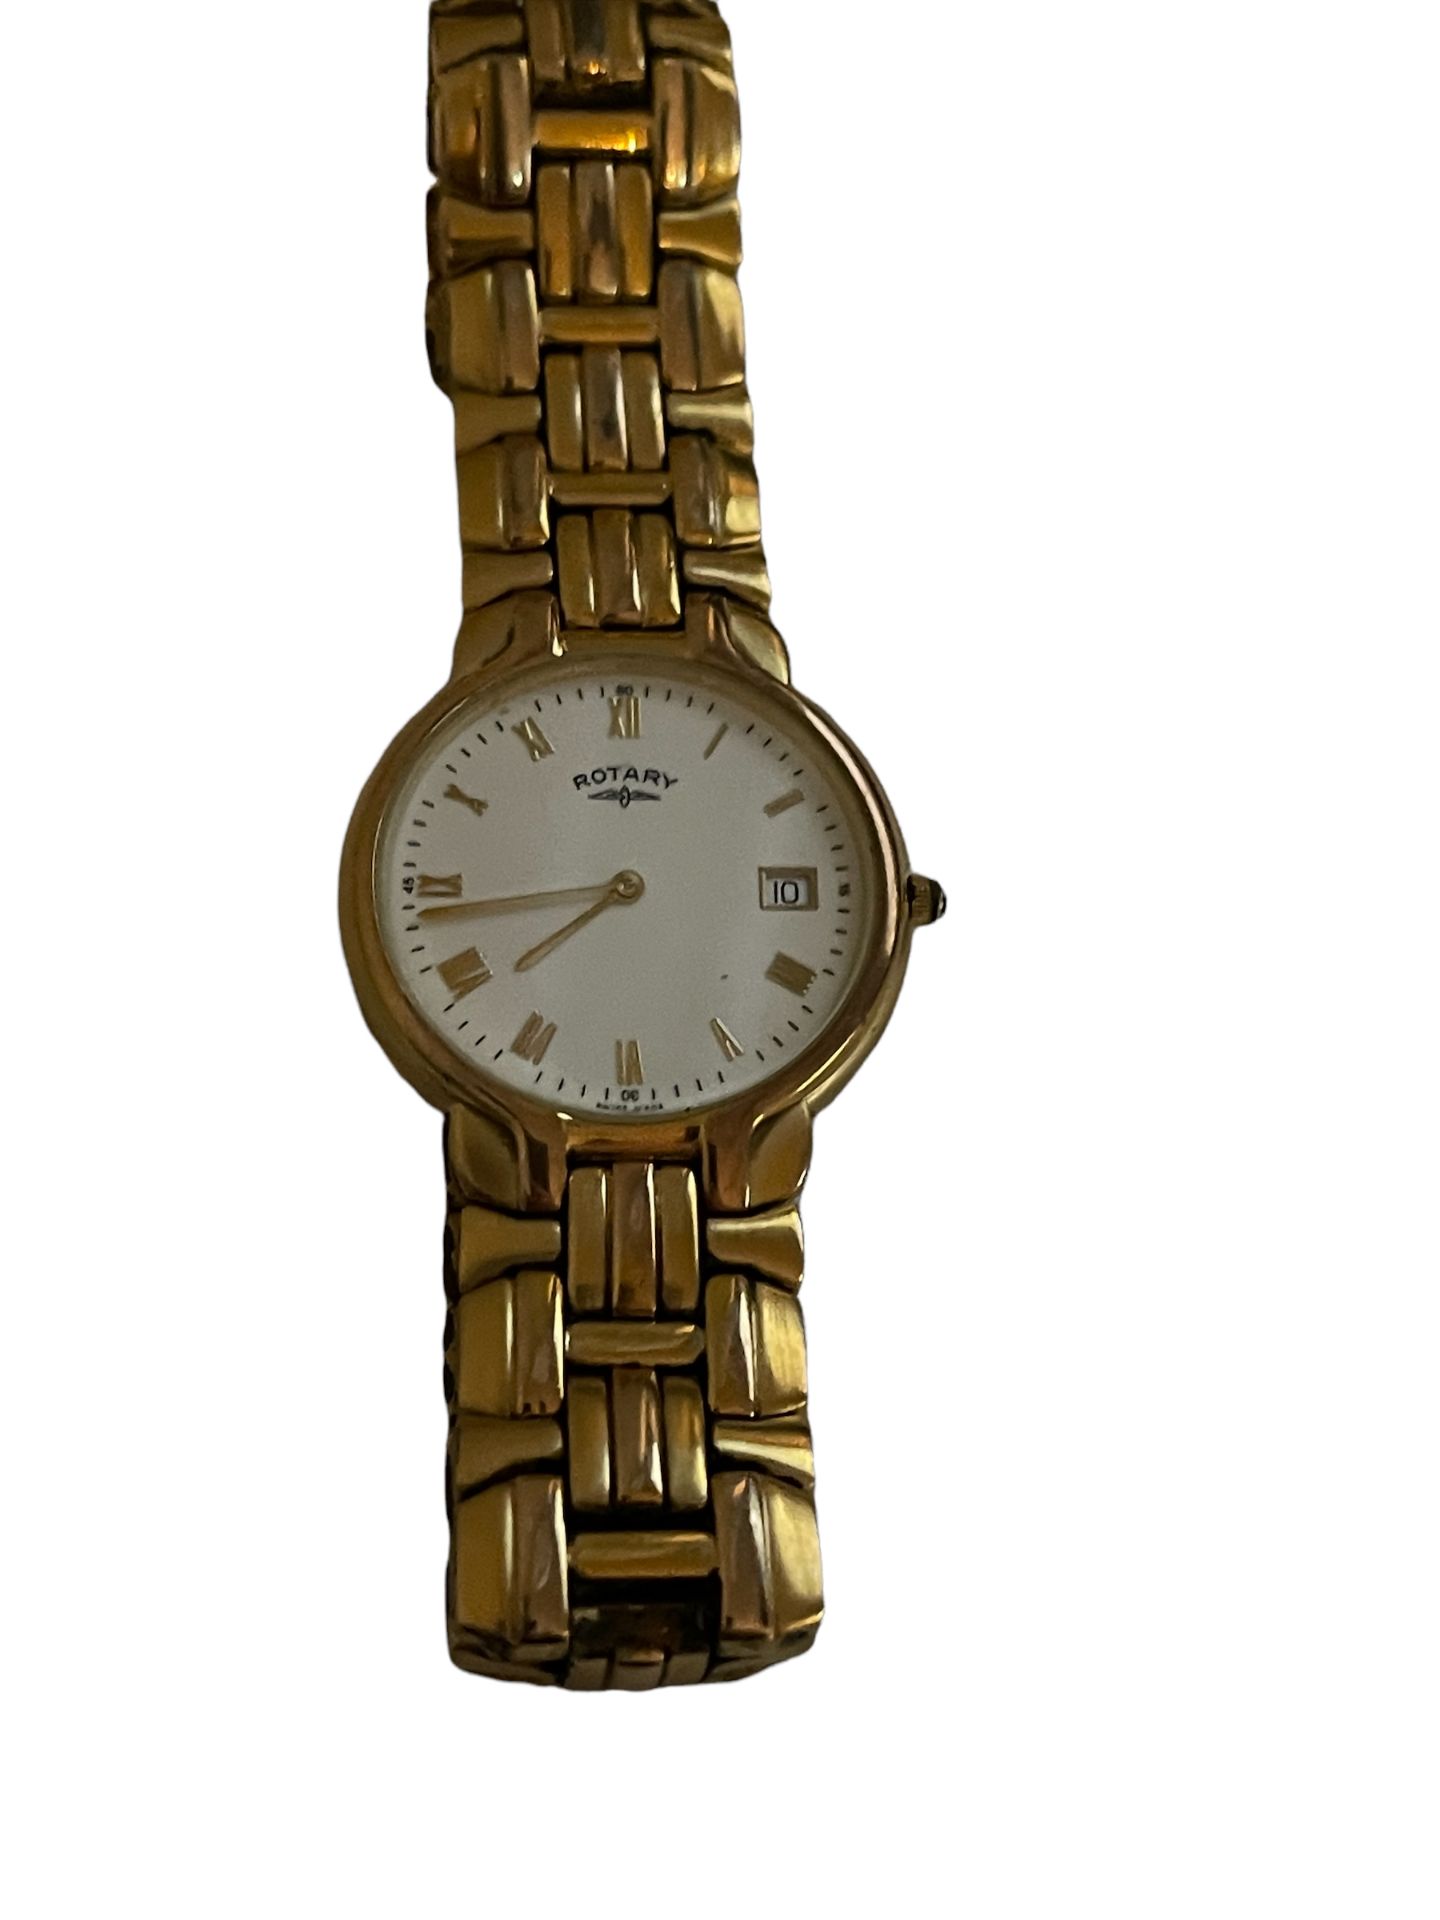 Mens Rotary Gold Plated Watch - Return Stock from our Private Jet Charter - Image 6 of 14